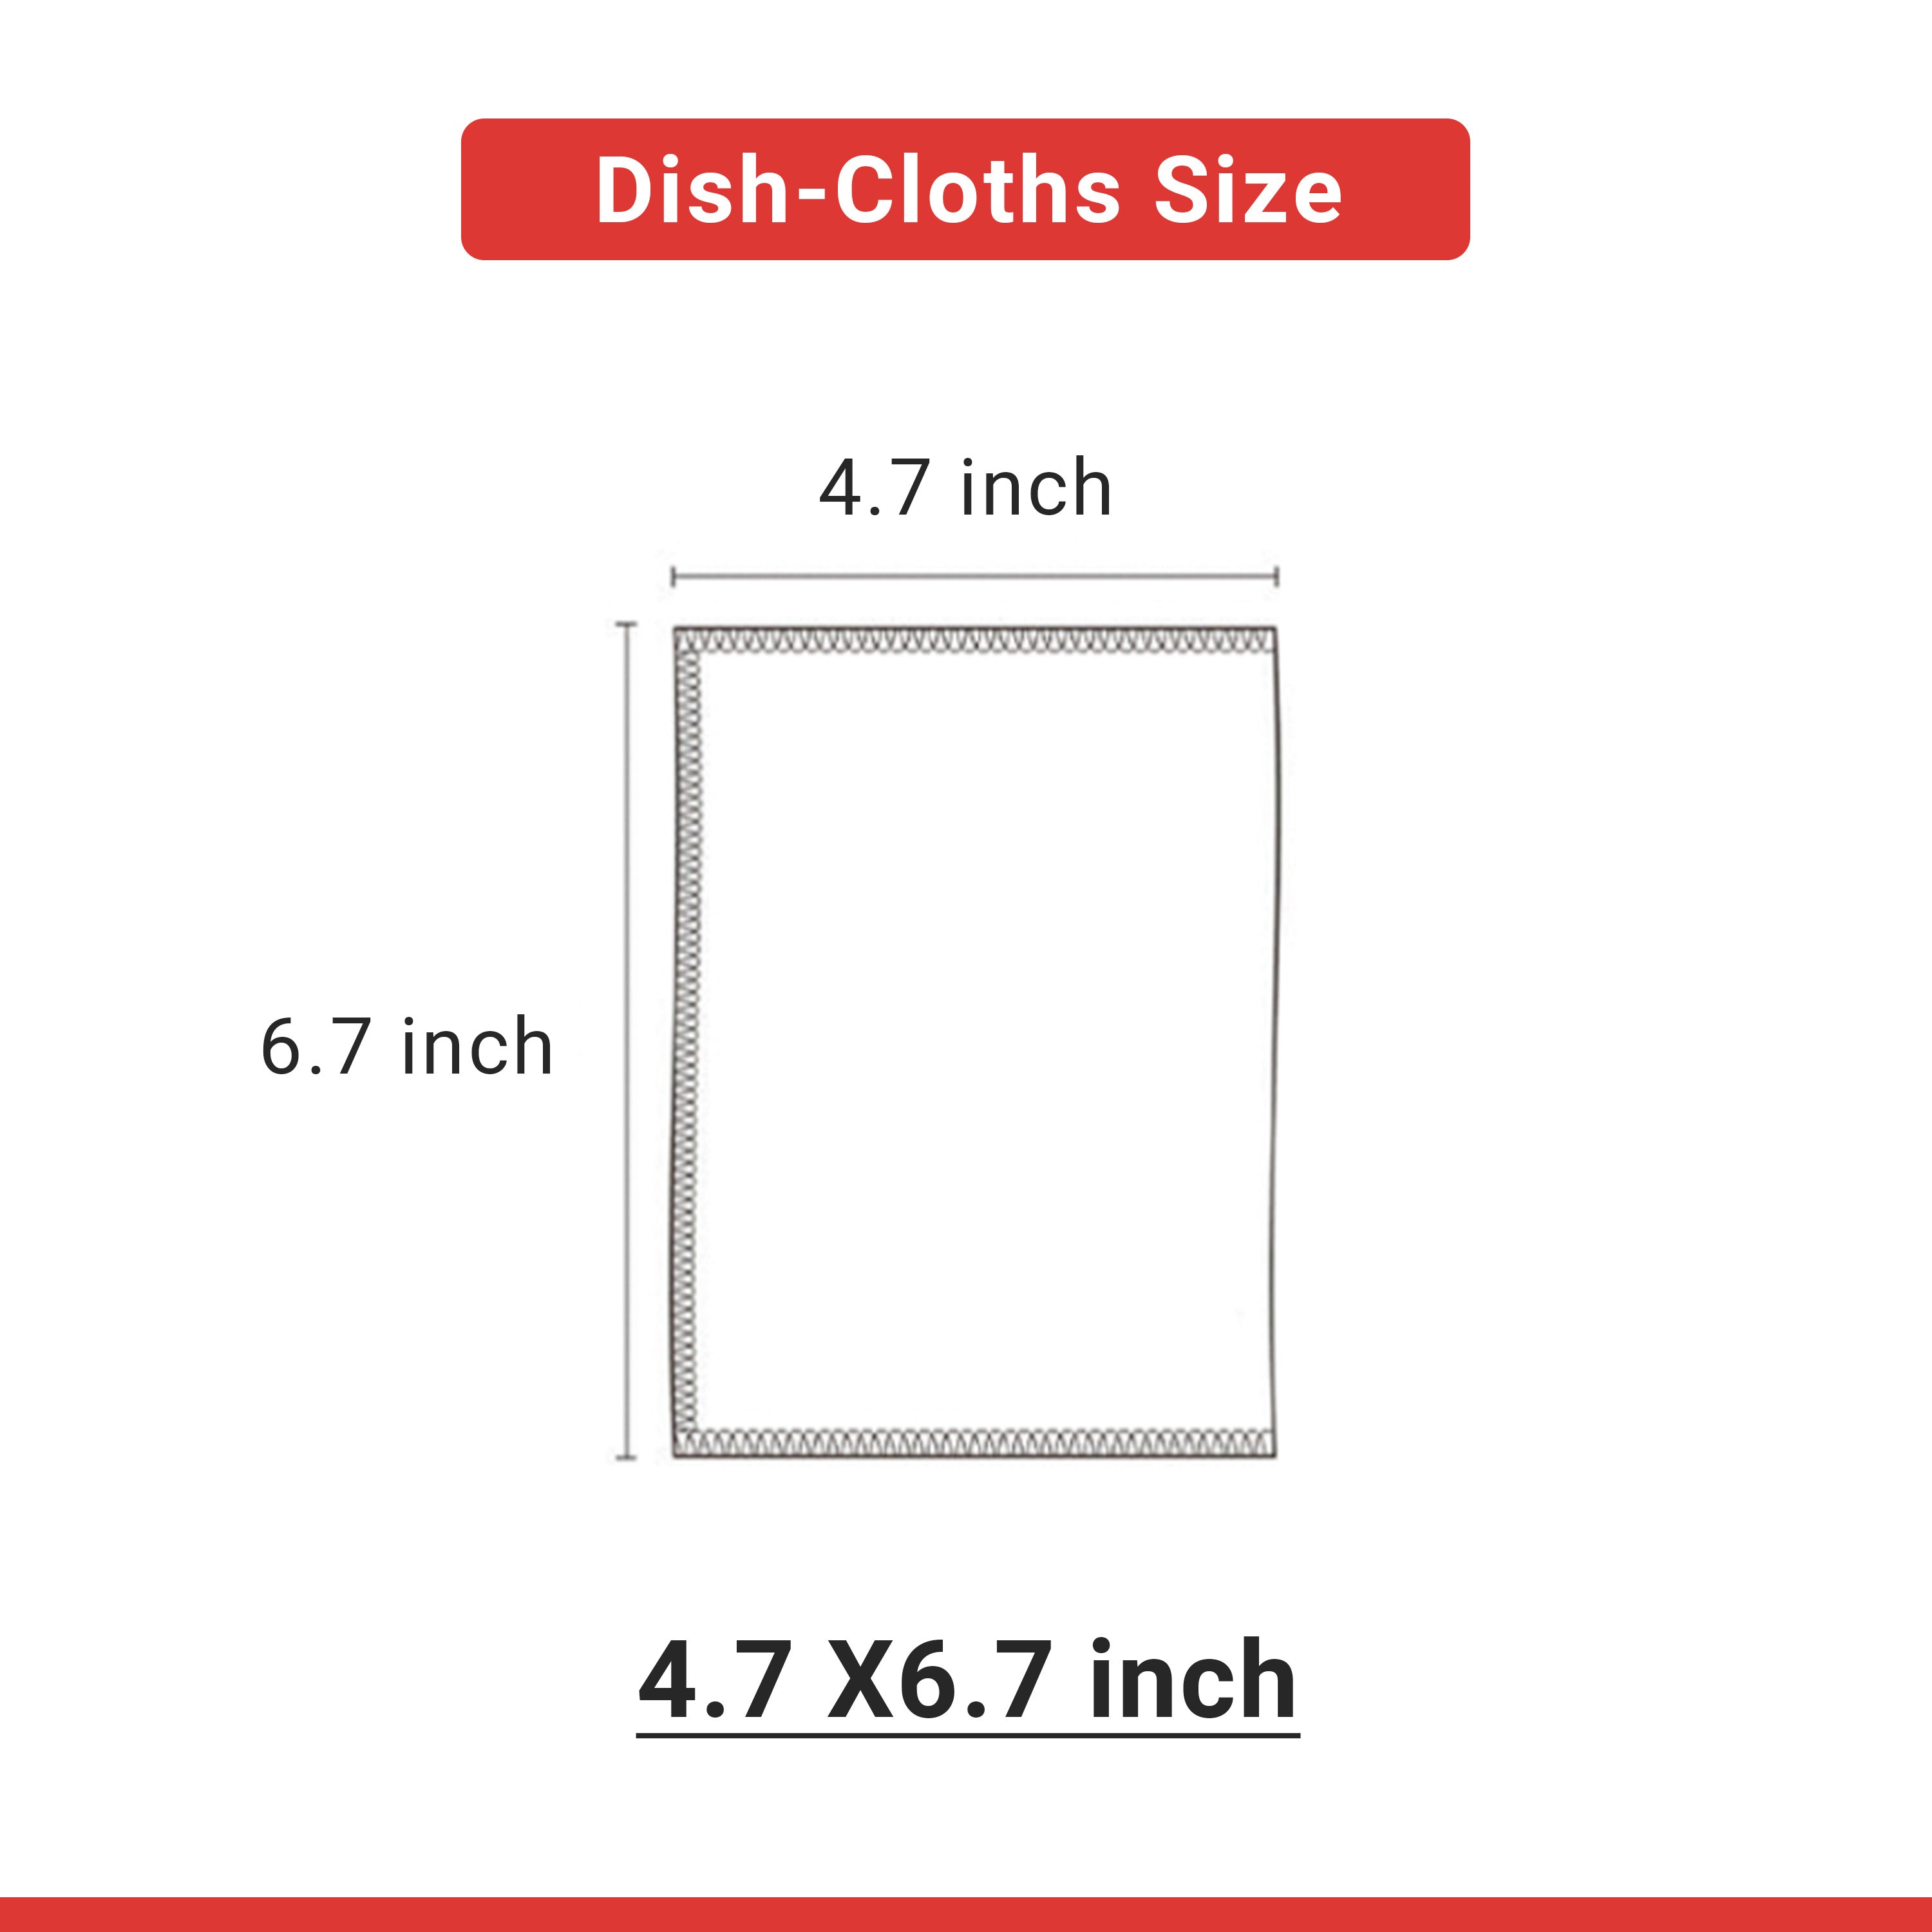 Sanitizing 100% Viscose Dish Cloths, Excellent Hygroscopic and Oil Absorbent, Removing Stains with just Water (6.7”X4.7”, Gray/Beige) 2 sets